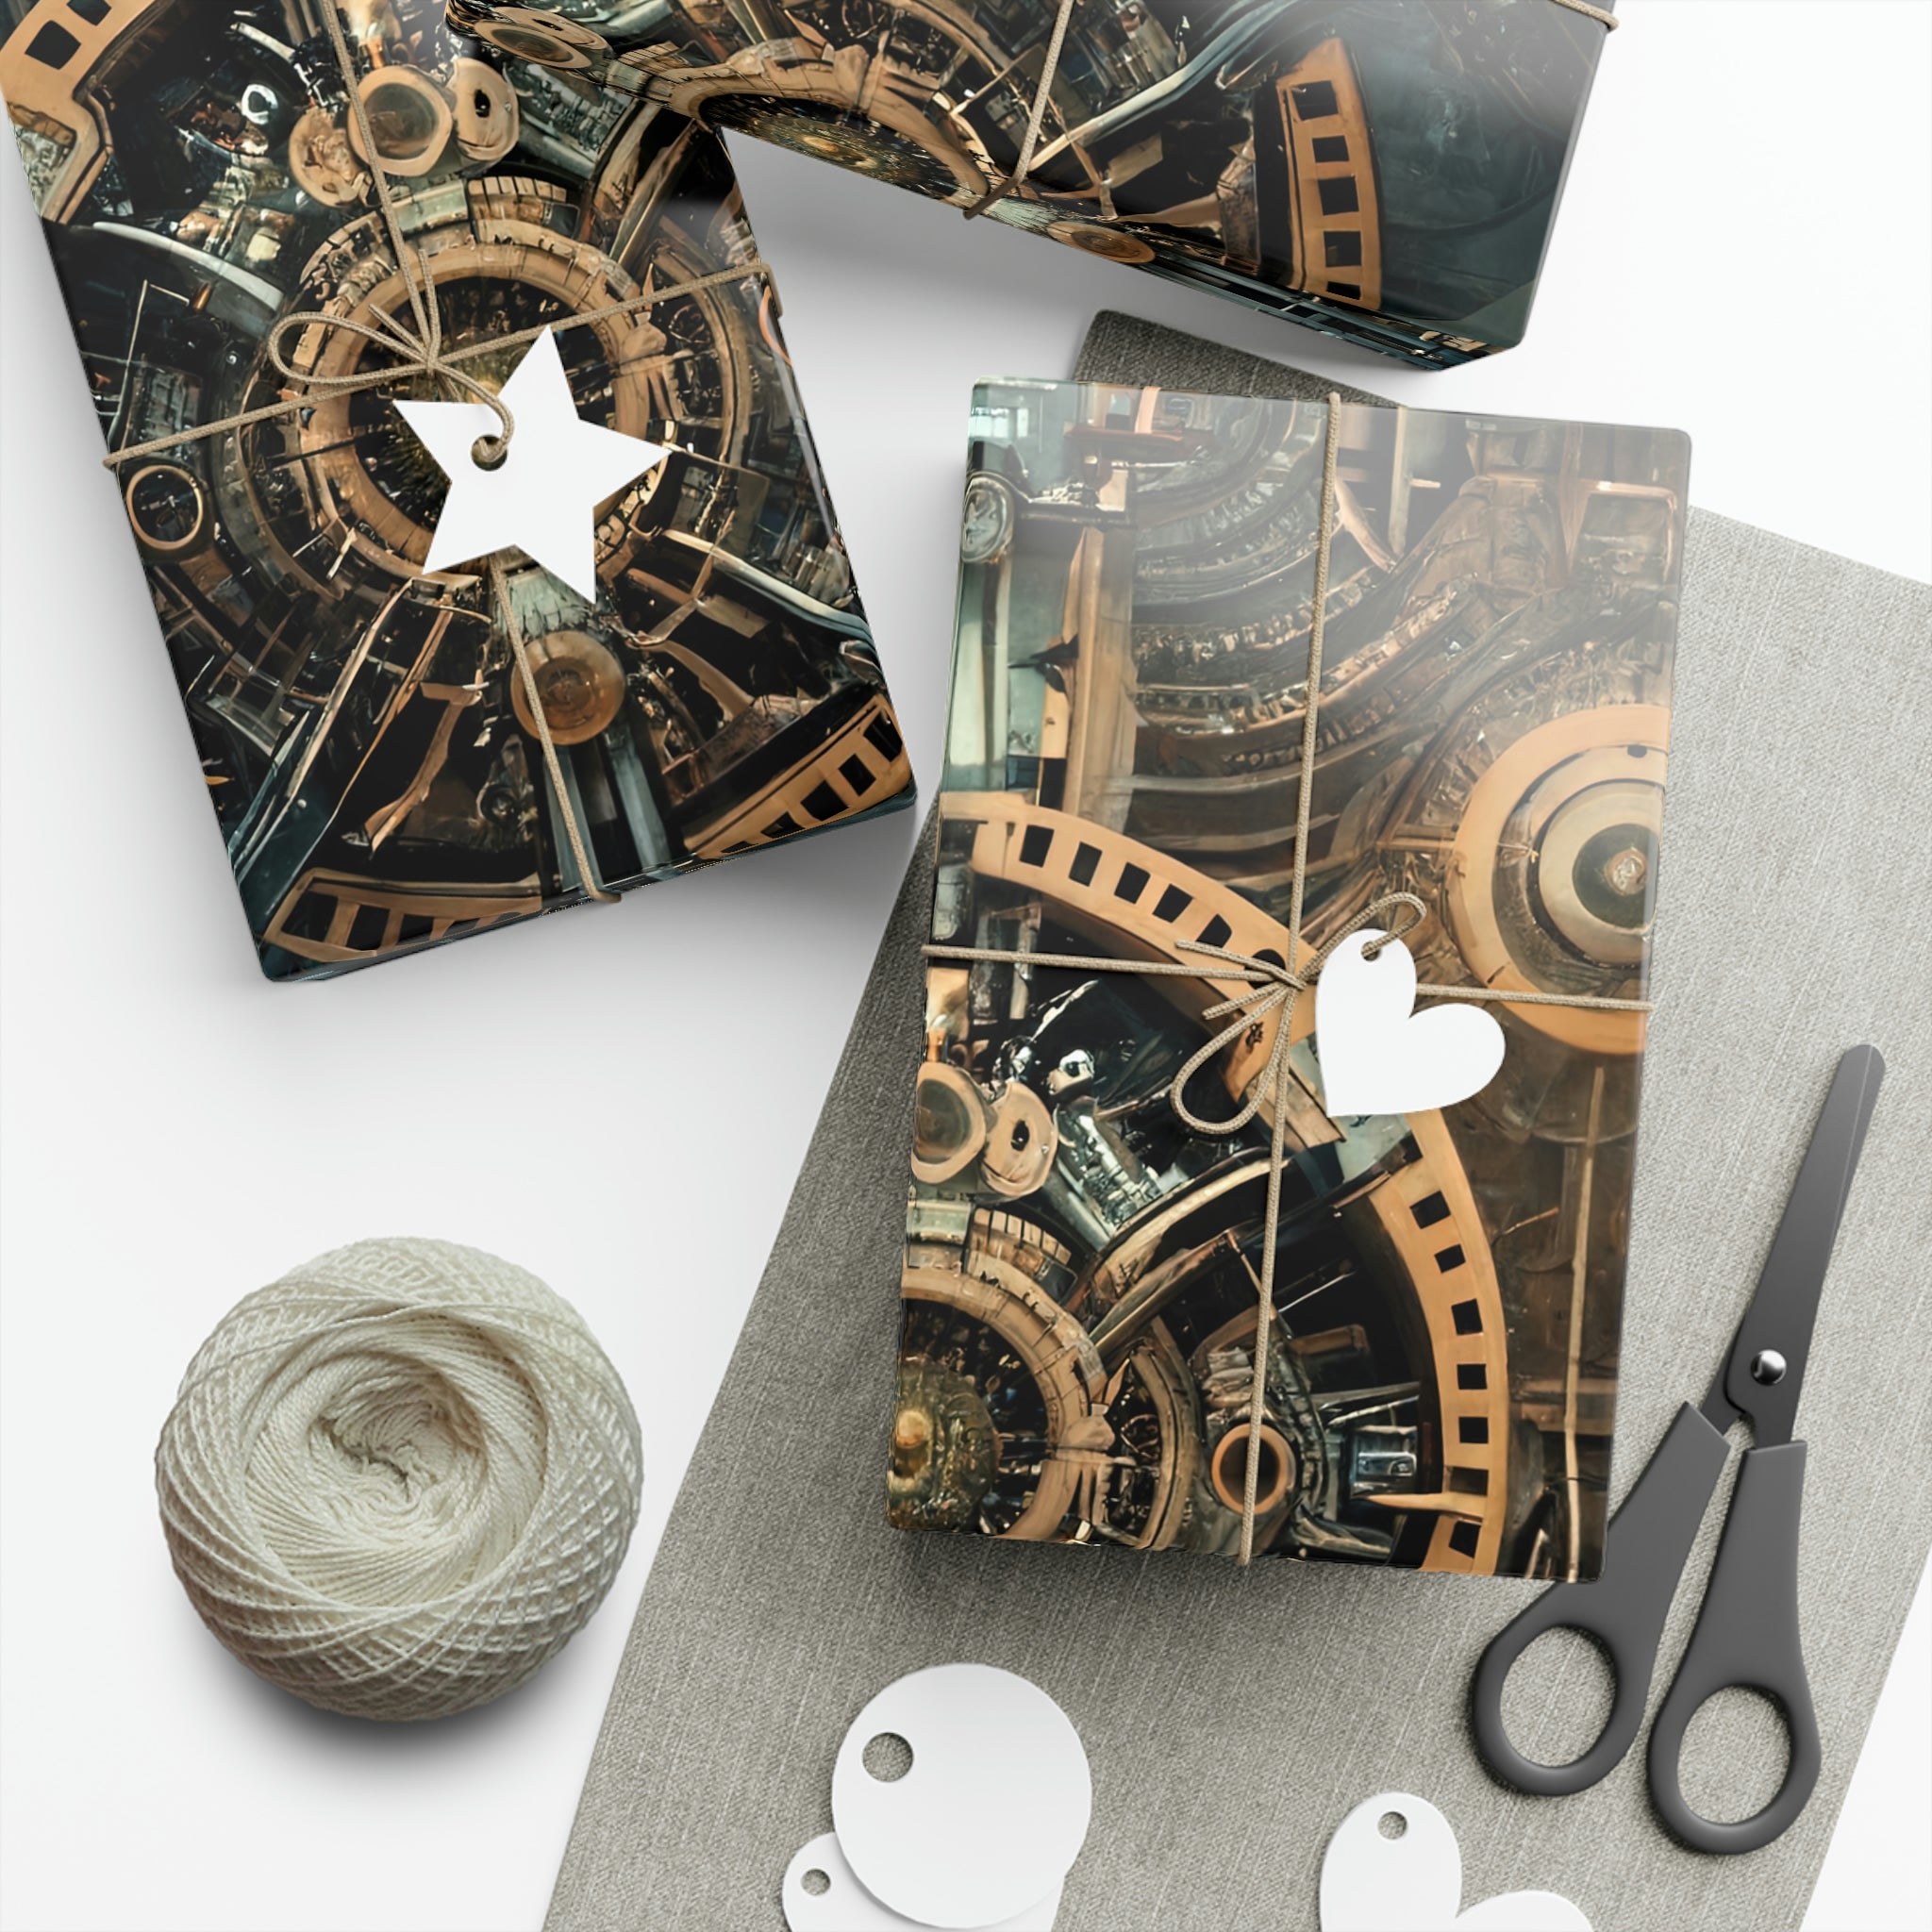 Steampunk Gear Gift Wrap Papers (Christmas, Birthday, Friendship, Holiday, Gifts)